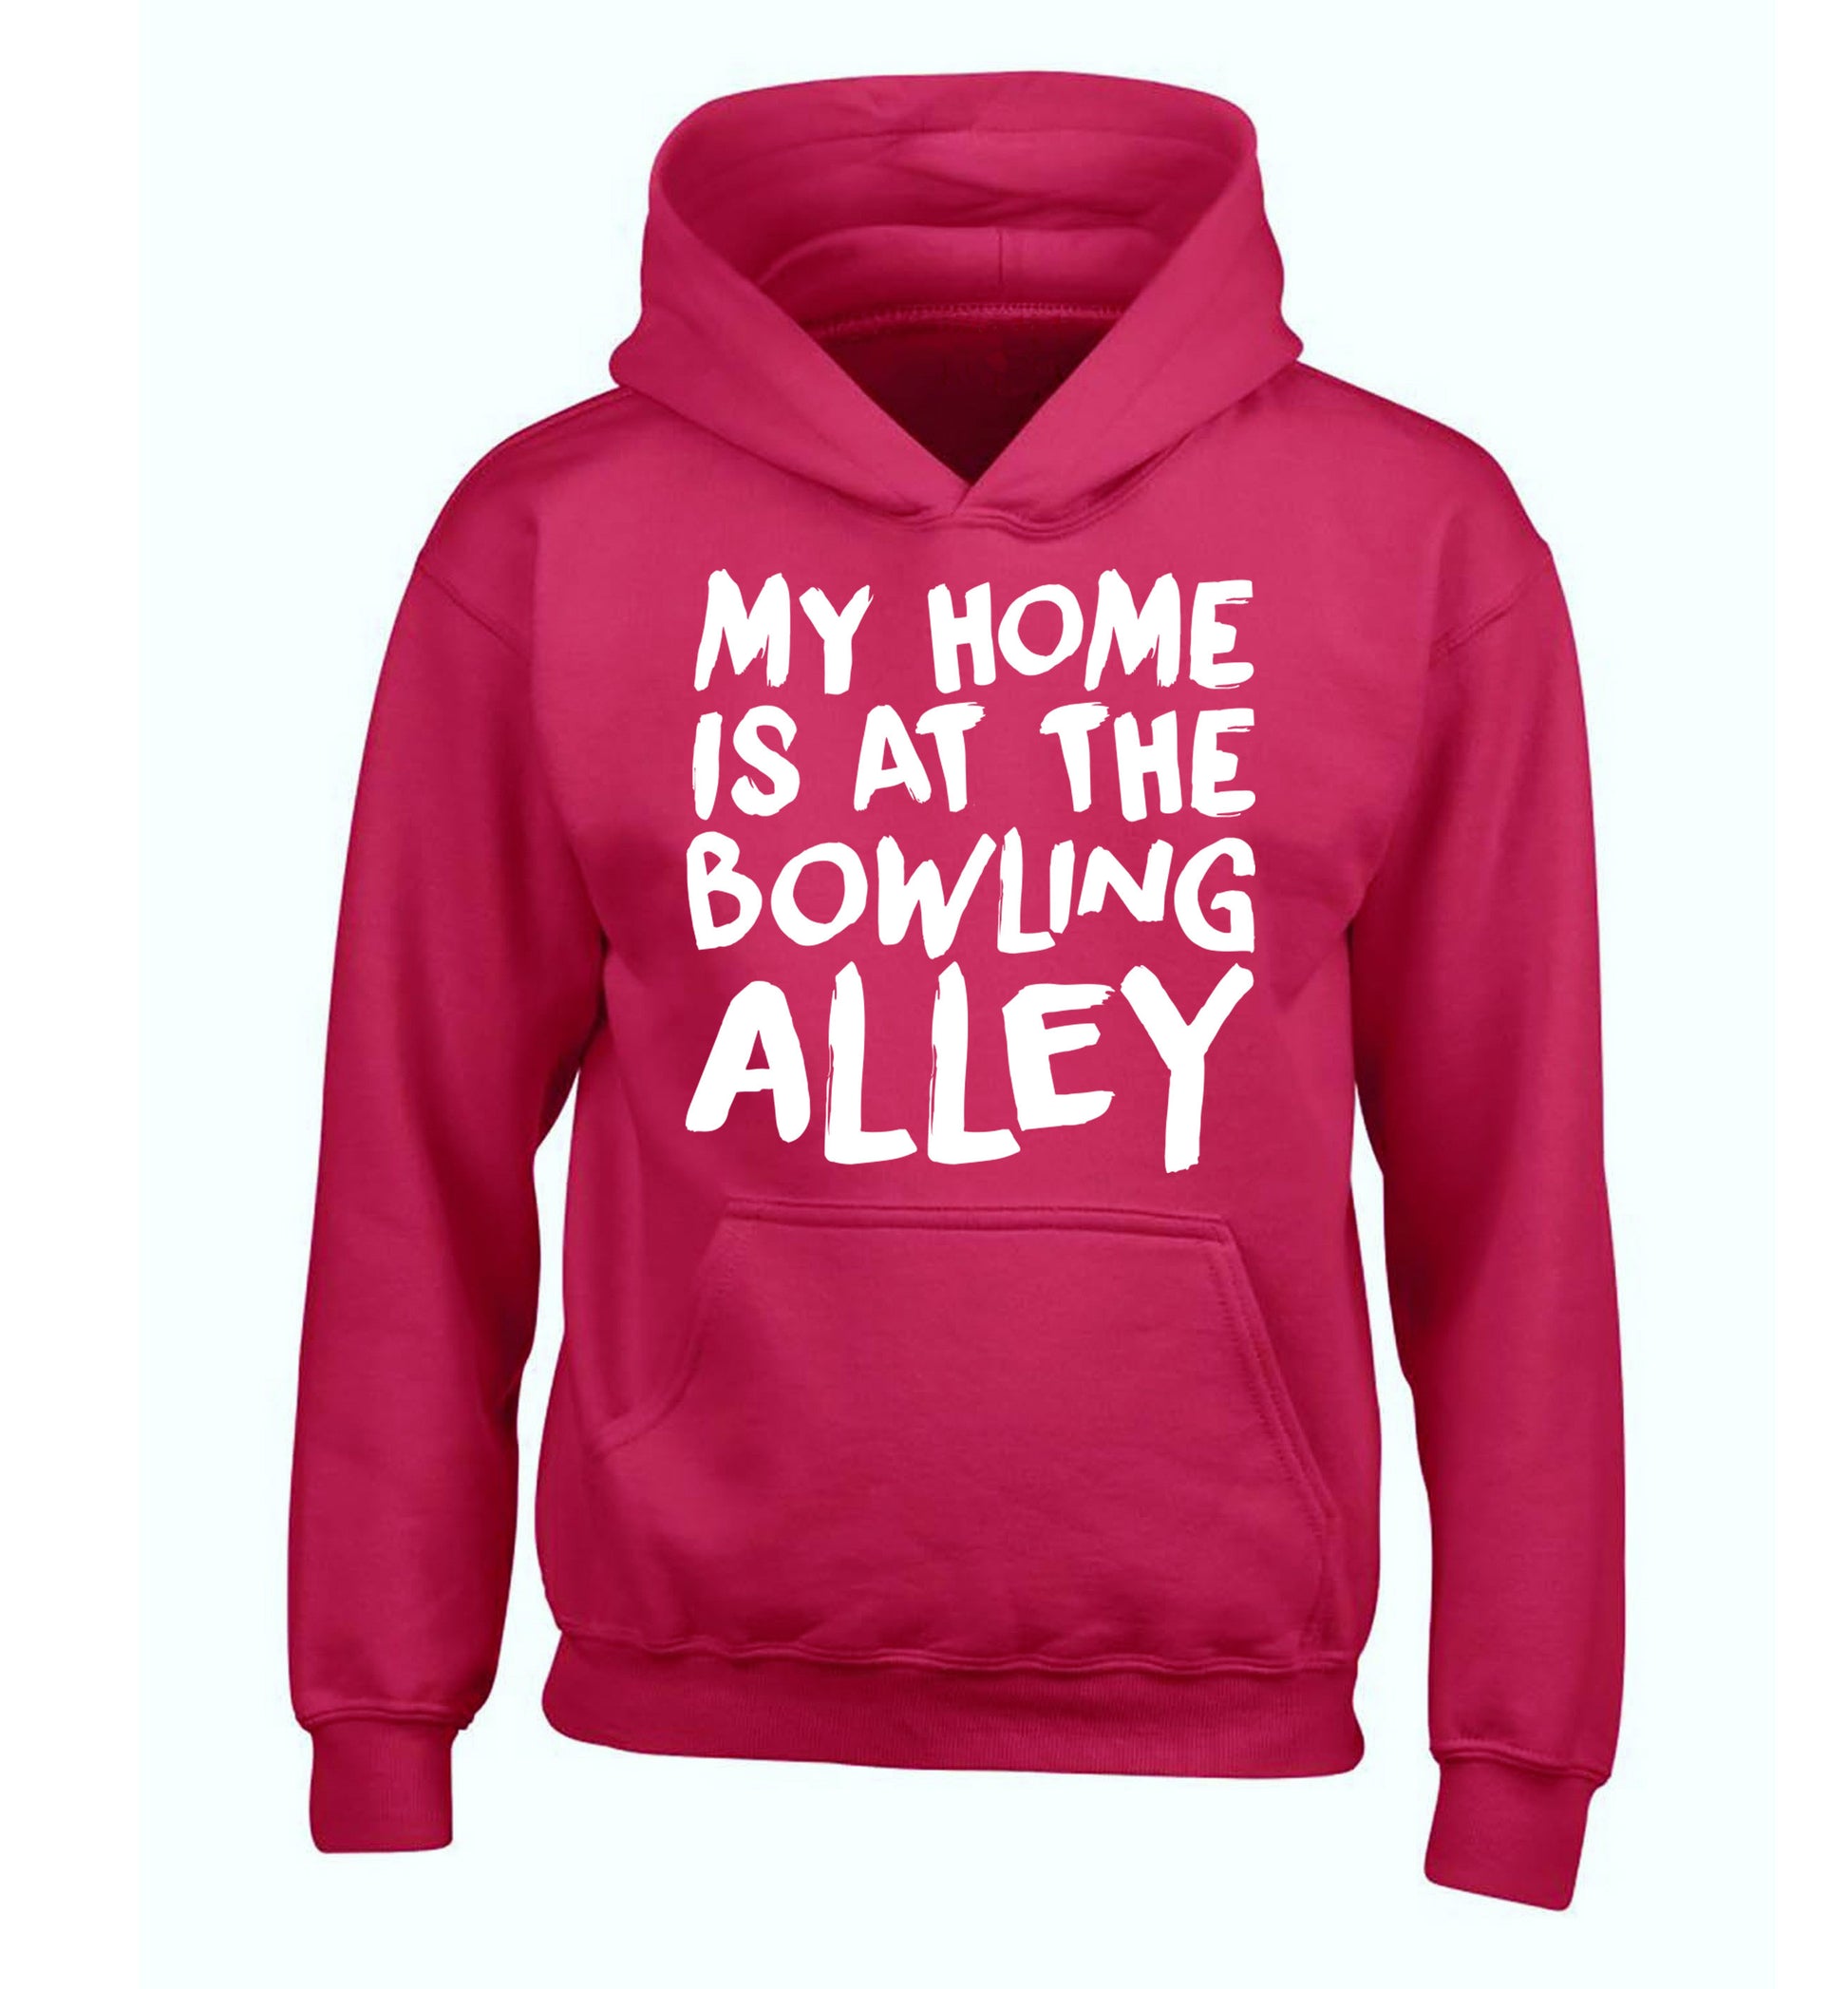 My home is at the bowling alley children's pink hoodie 12-14 Years